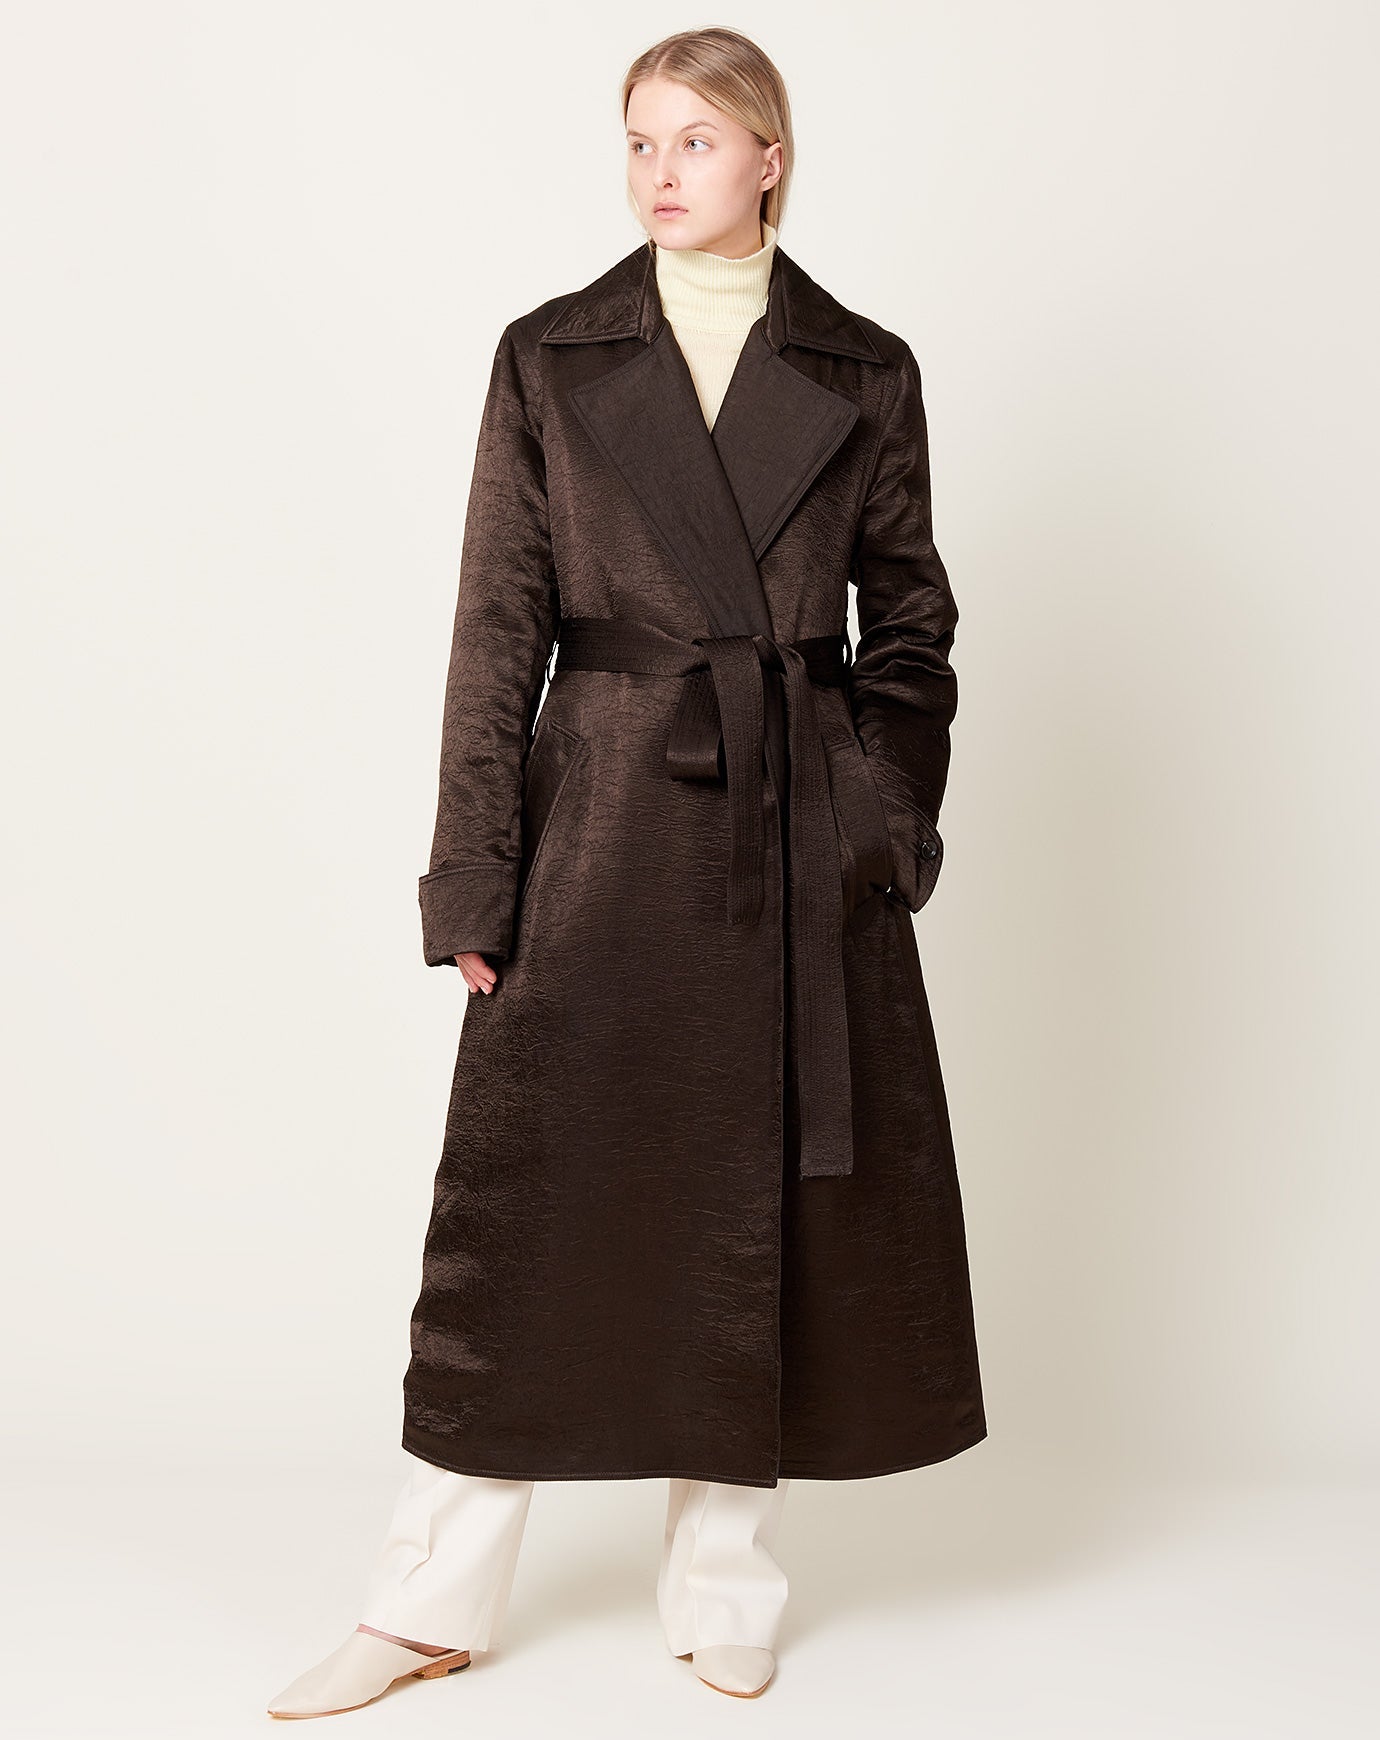 Maria McManus Quilted Trench Coat in Chocolate